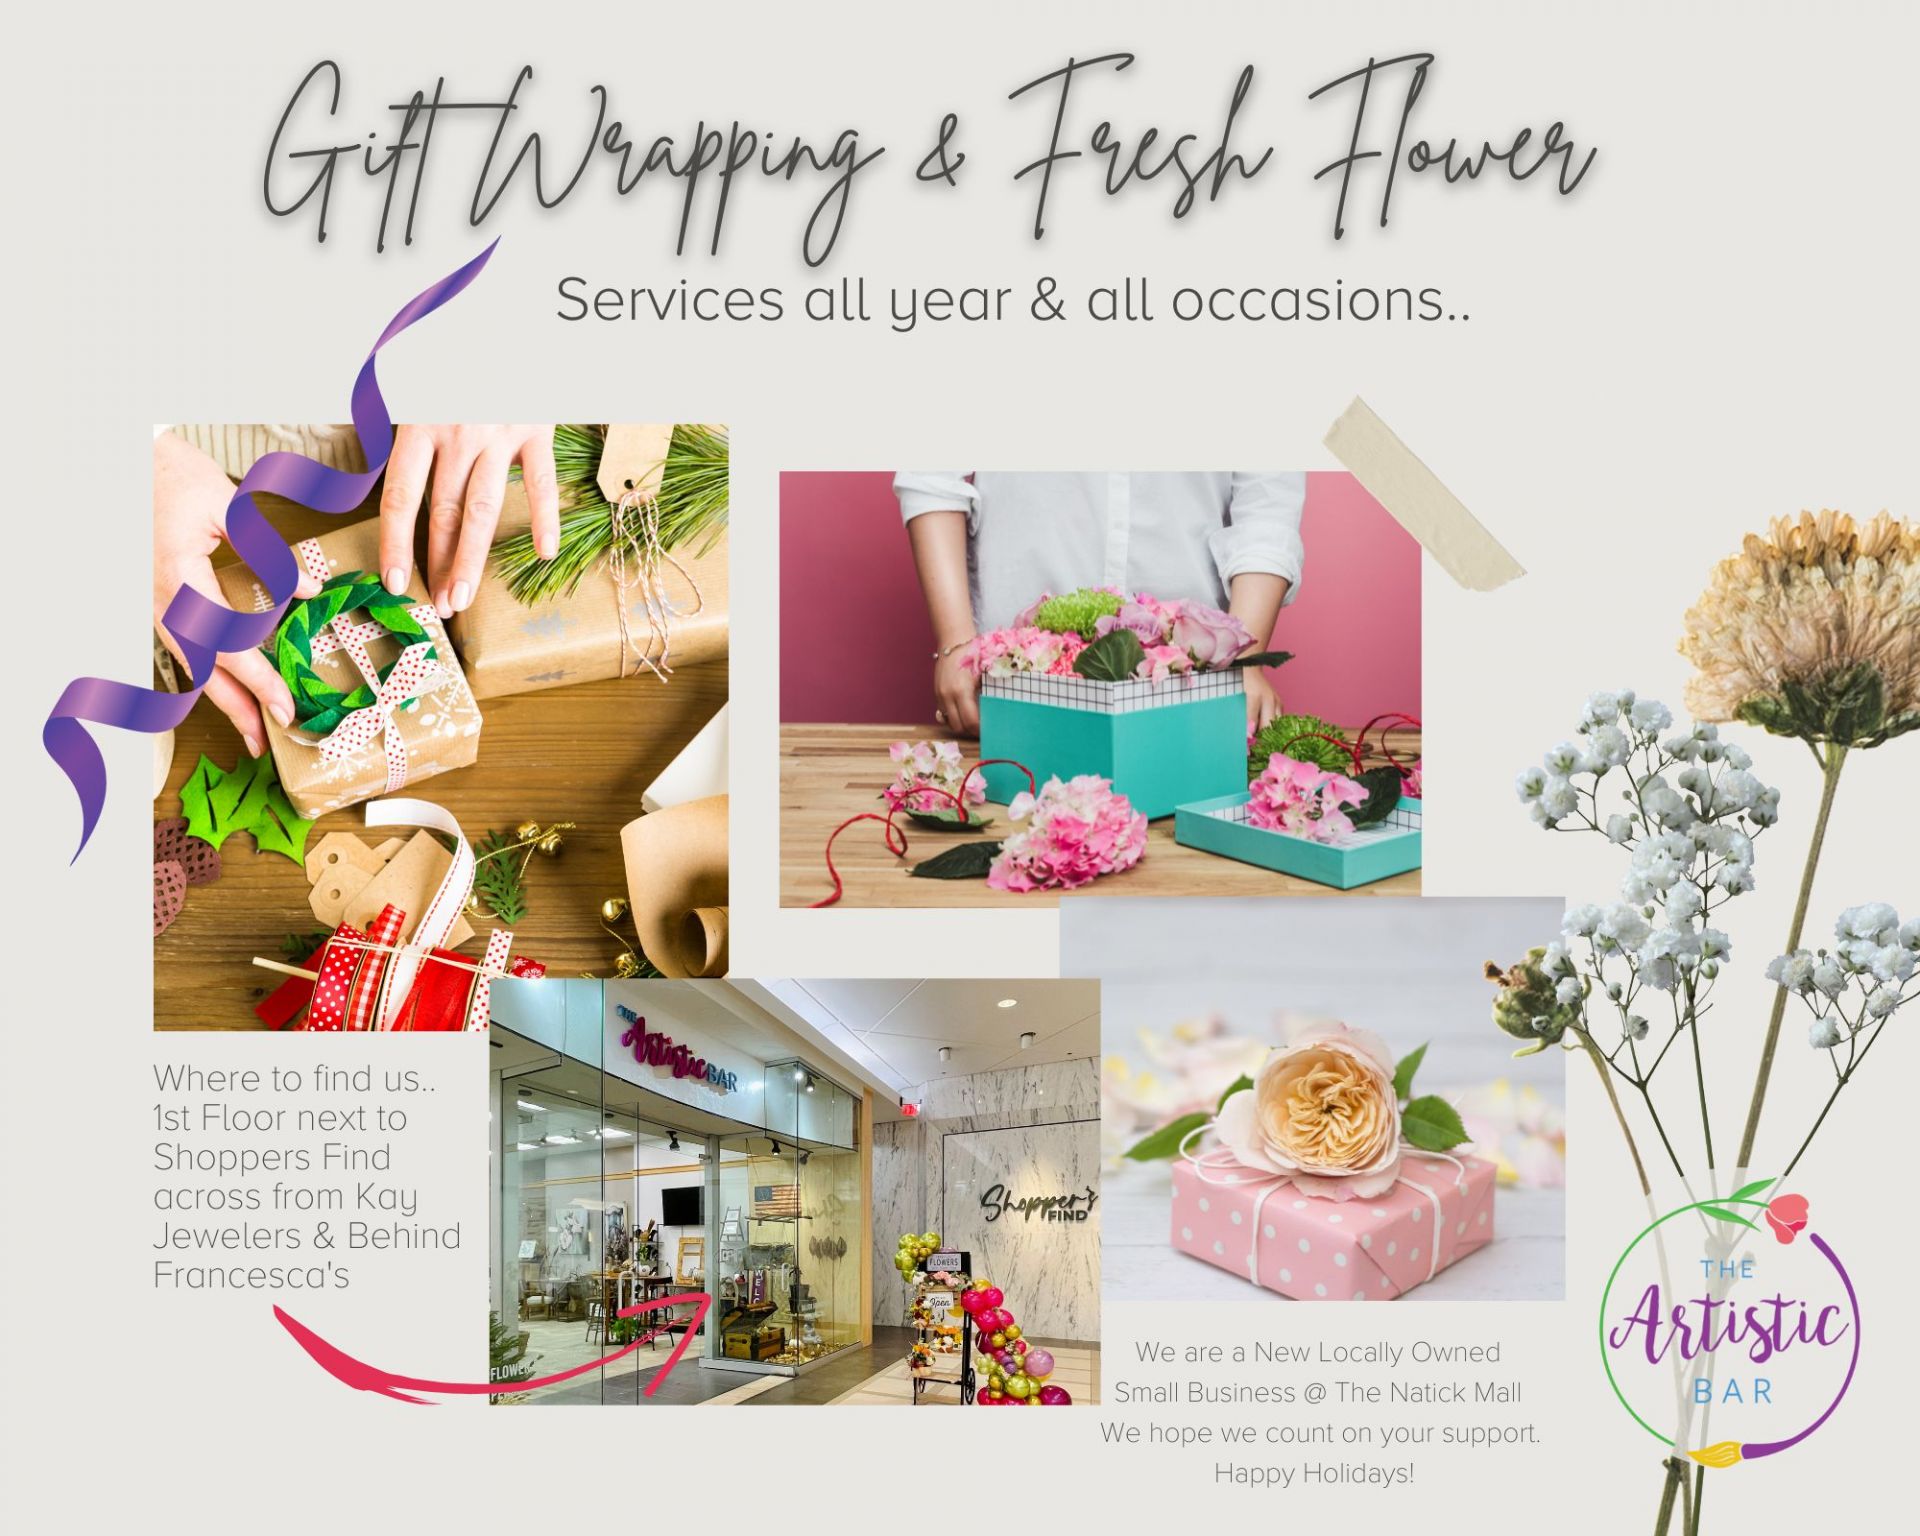 Gifts Wrapping & Fresh Flowers Services from The Artistic Bar